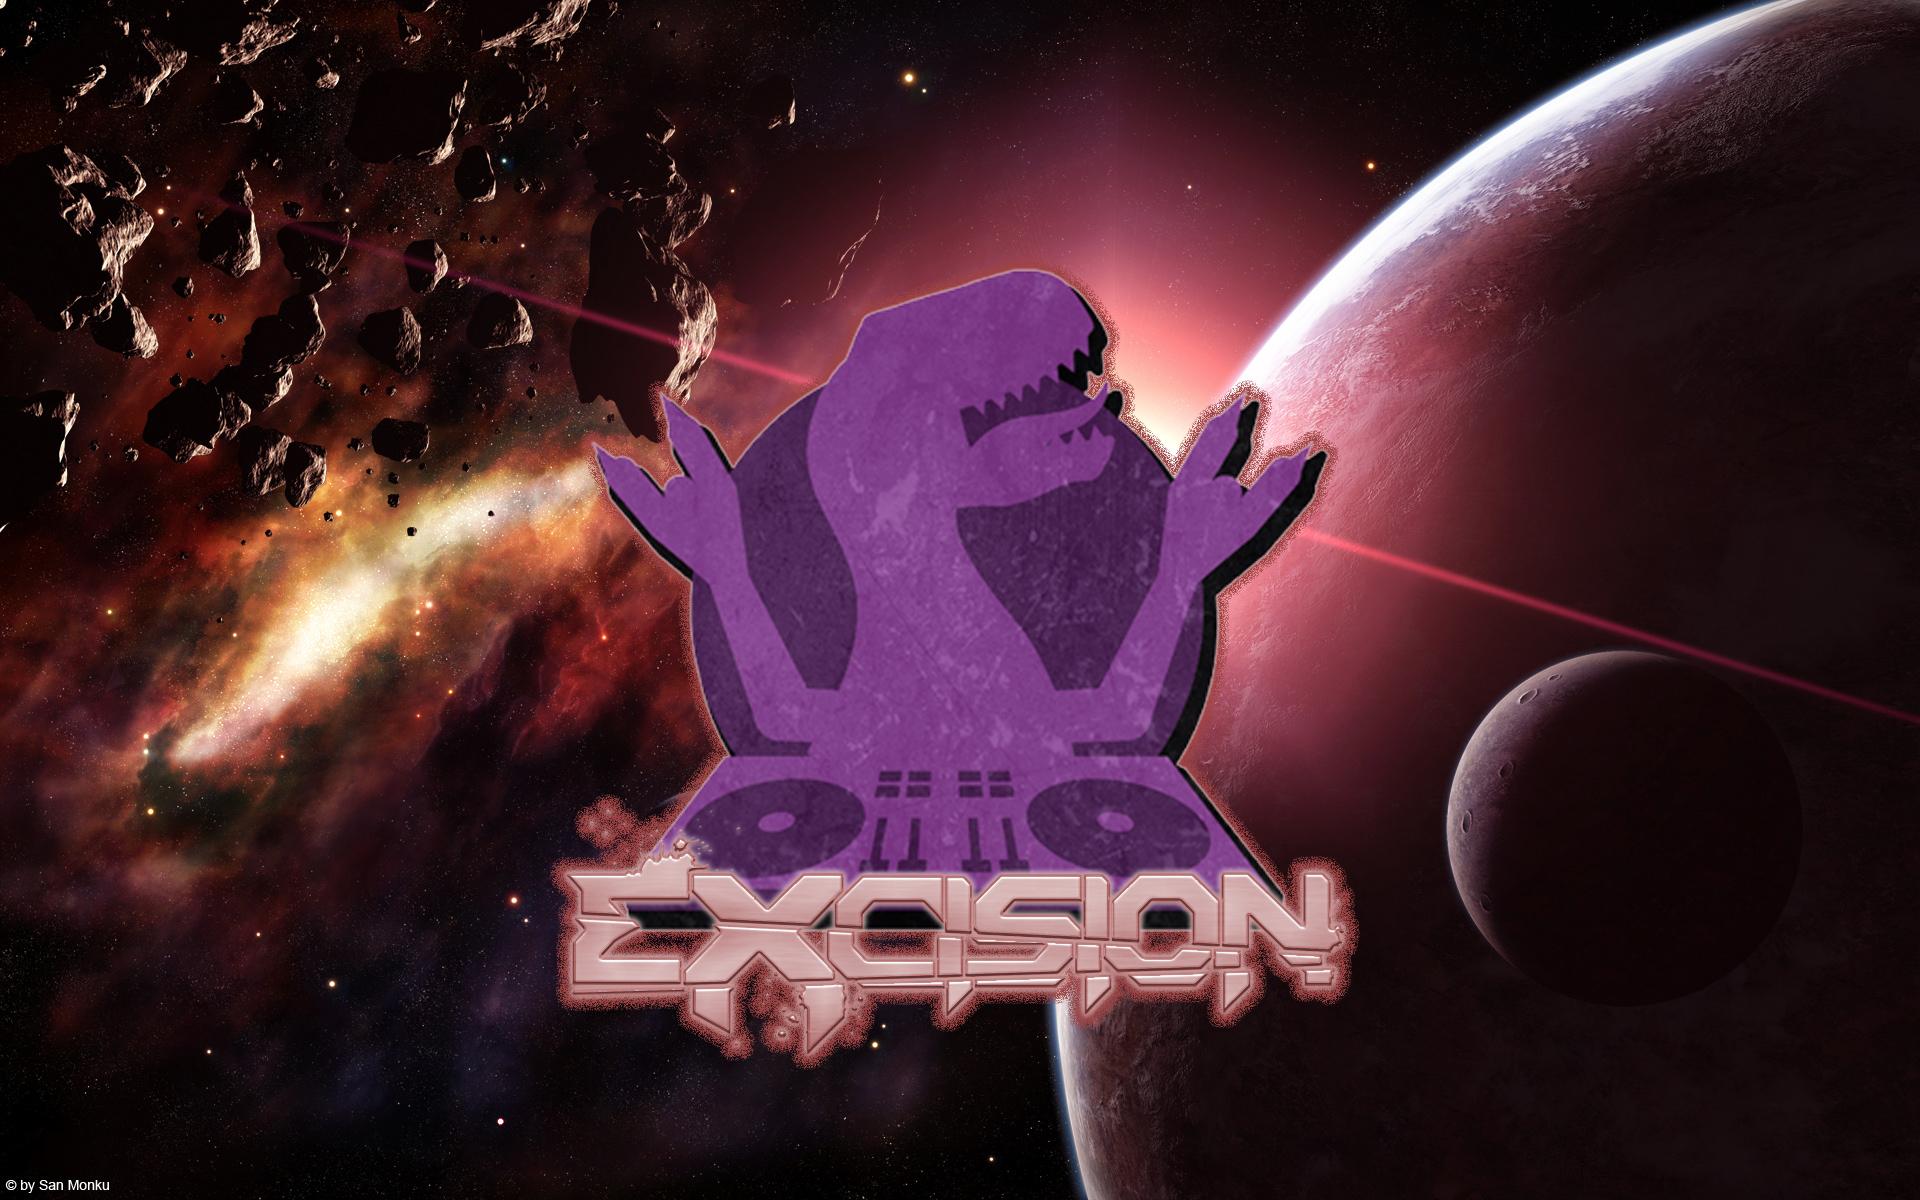 I made an excision wallpaper because I was bored